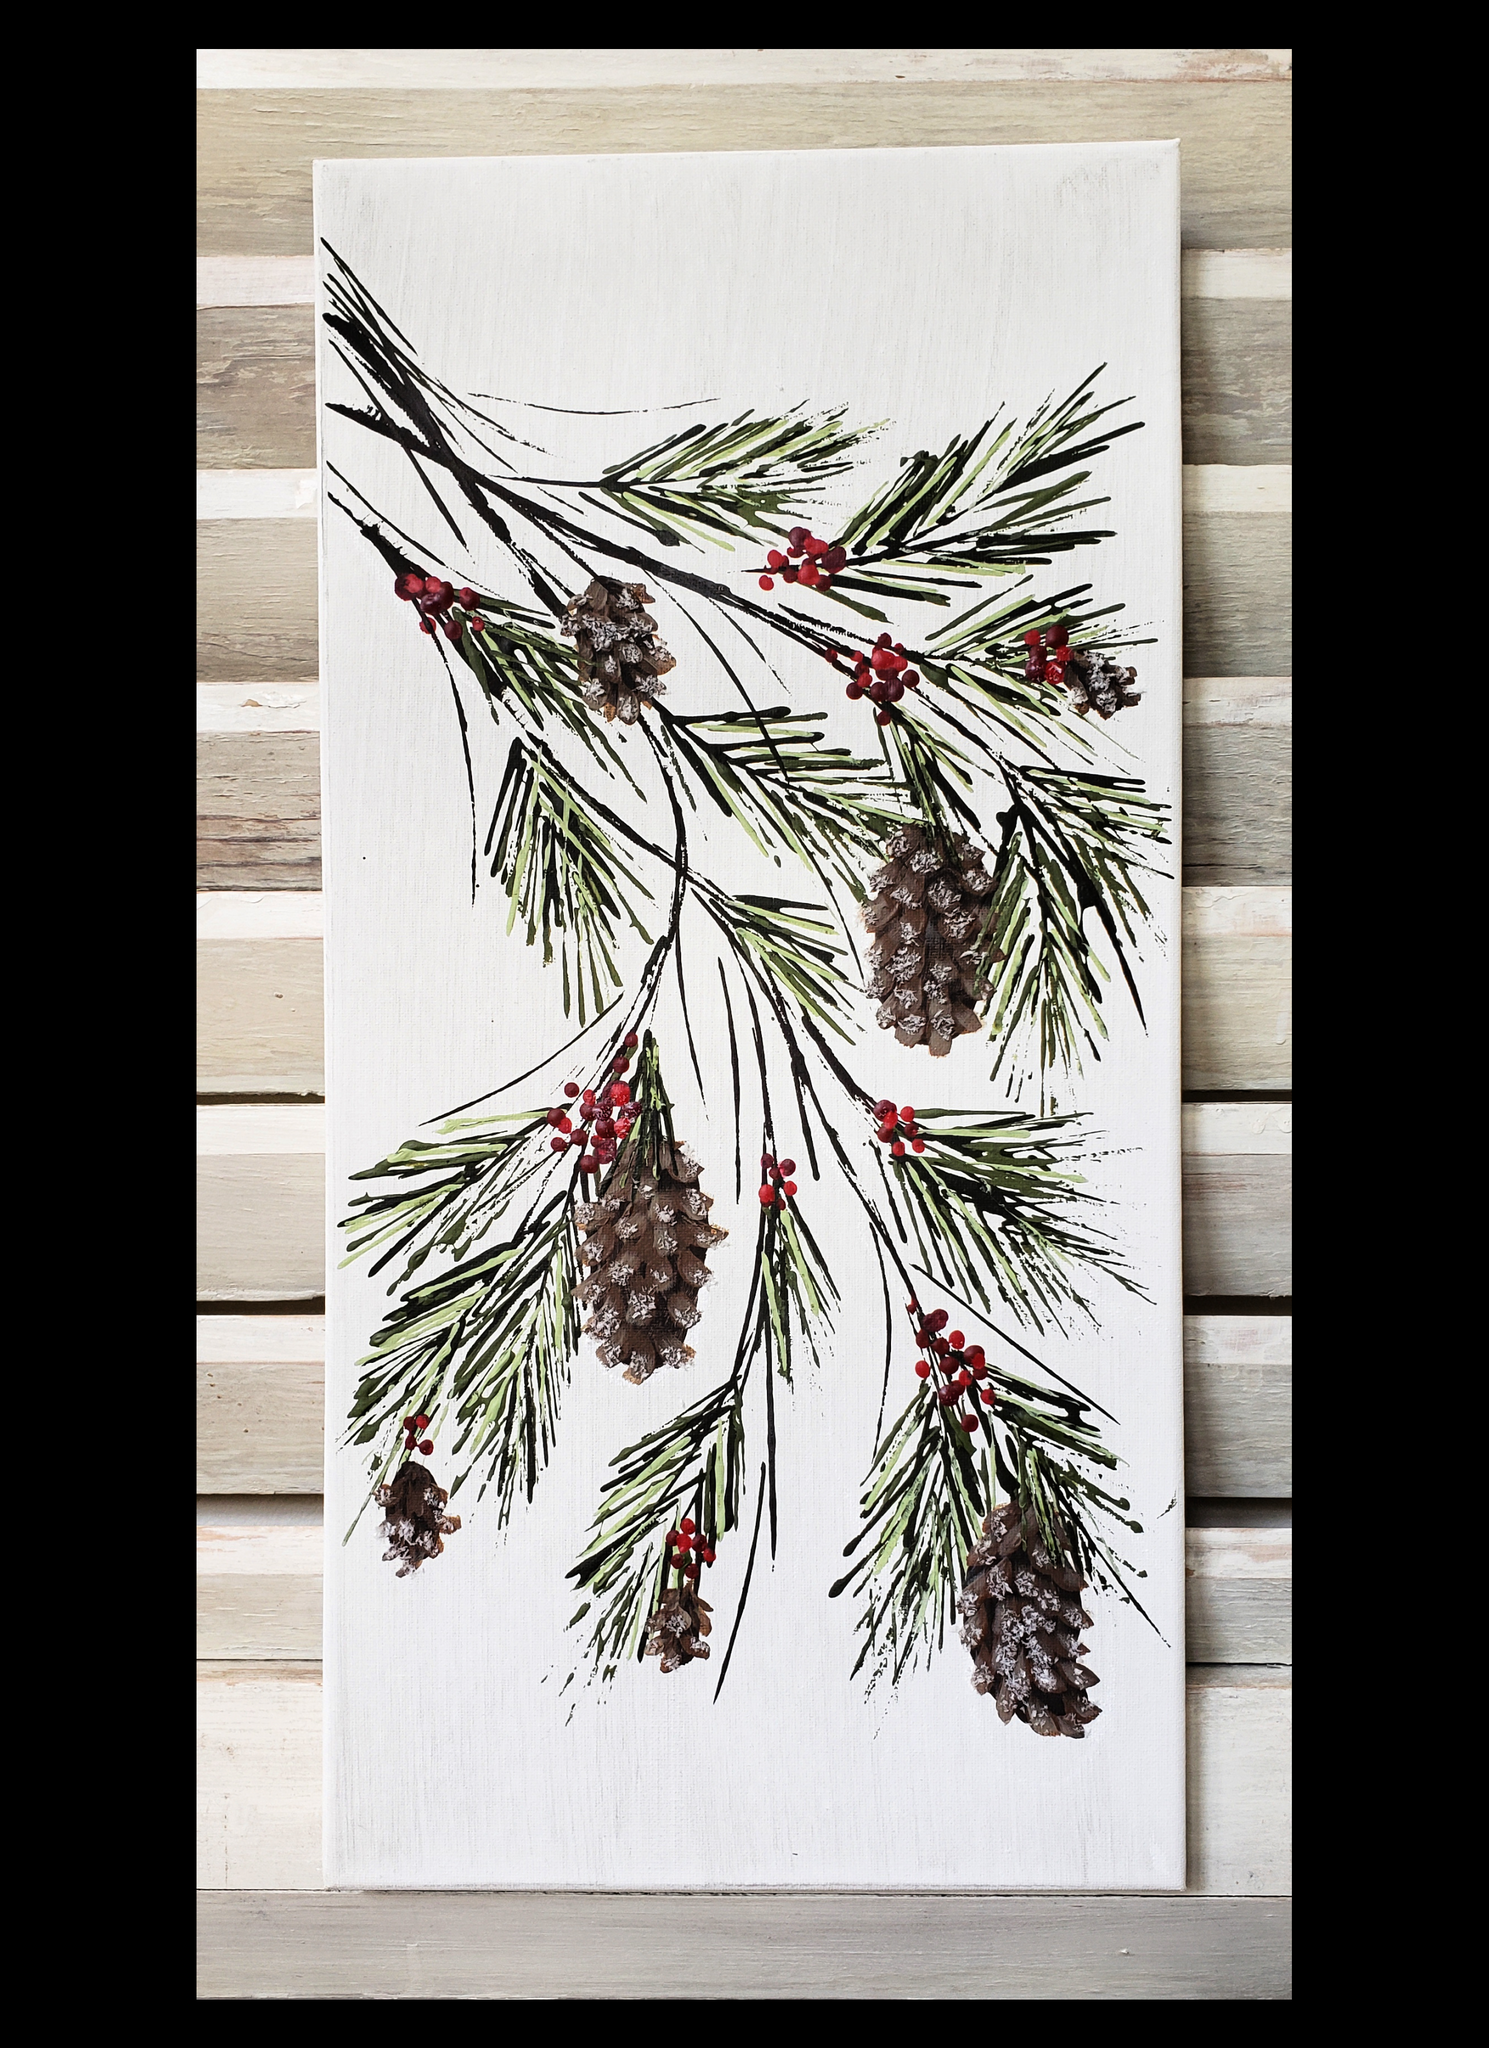 **PRIVATE** LIBERTY GREEN COMMUNITY Winter Pine Cone Branch Workshop October 25th